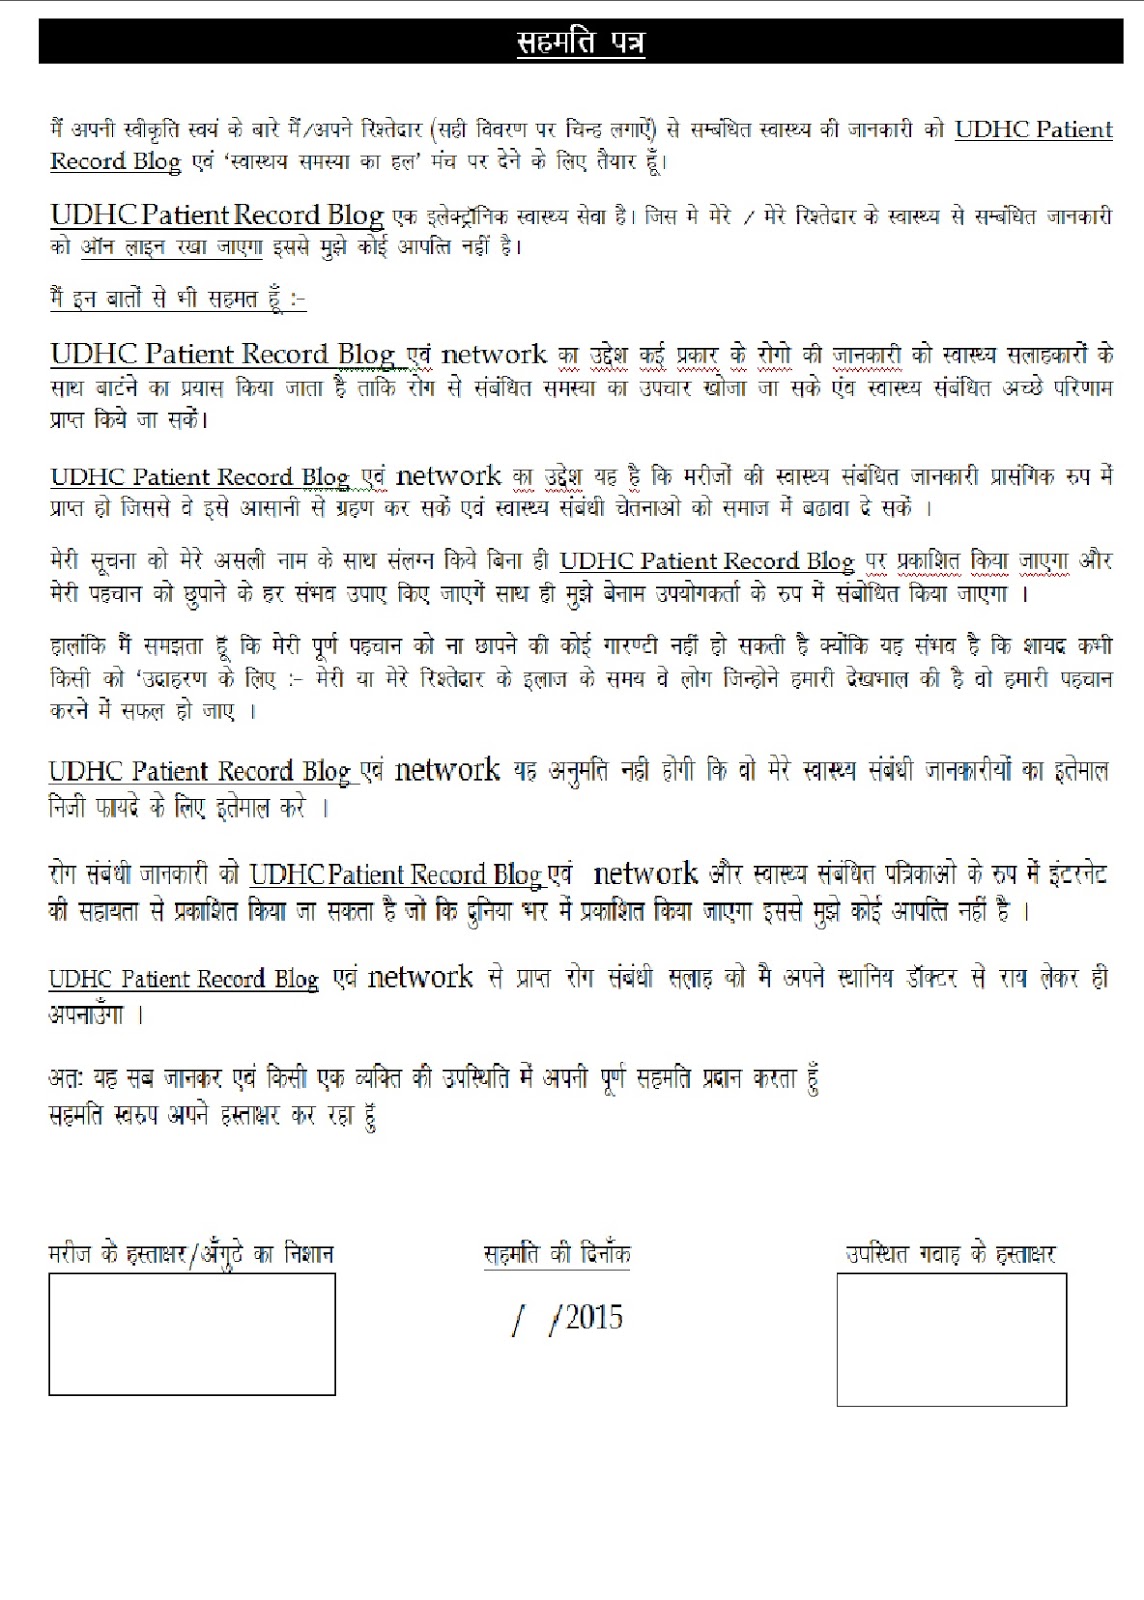 consent form for thesis in hindi